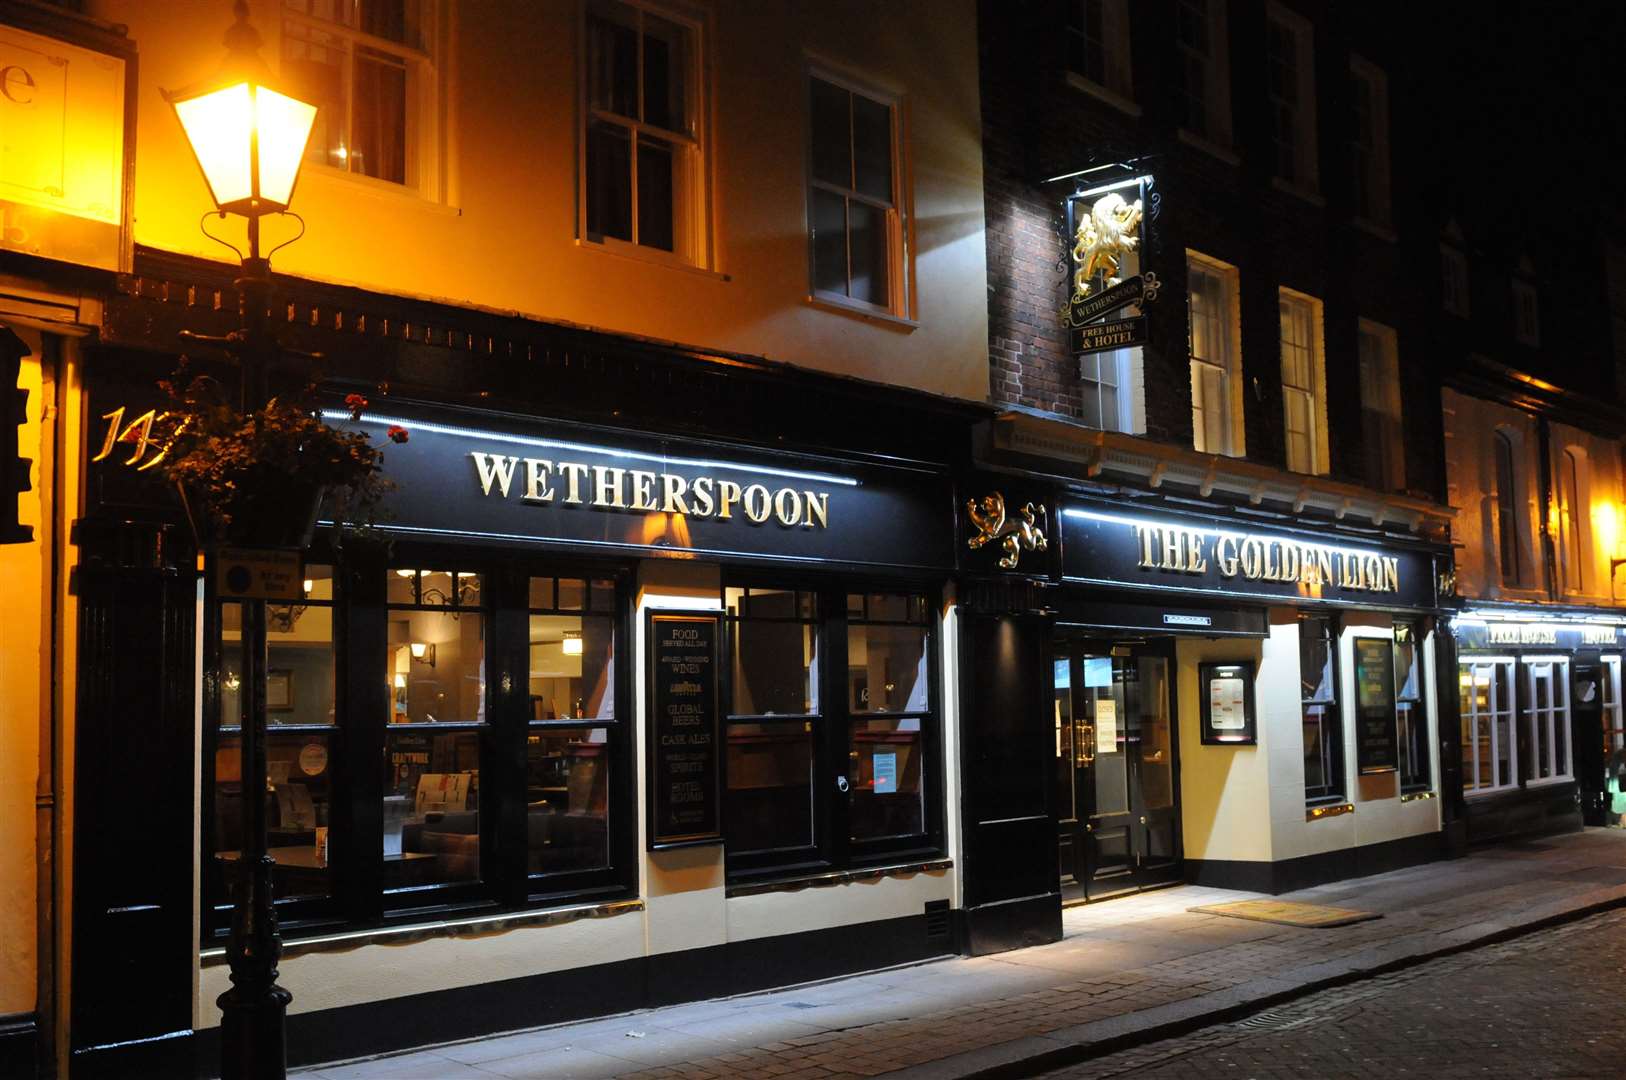 The Golden Lion Wetherspoon pub opened in 1999 (Picture: Steve Crispe)